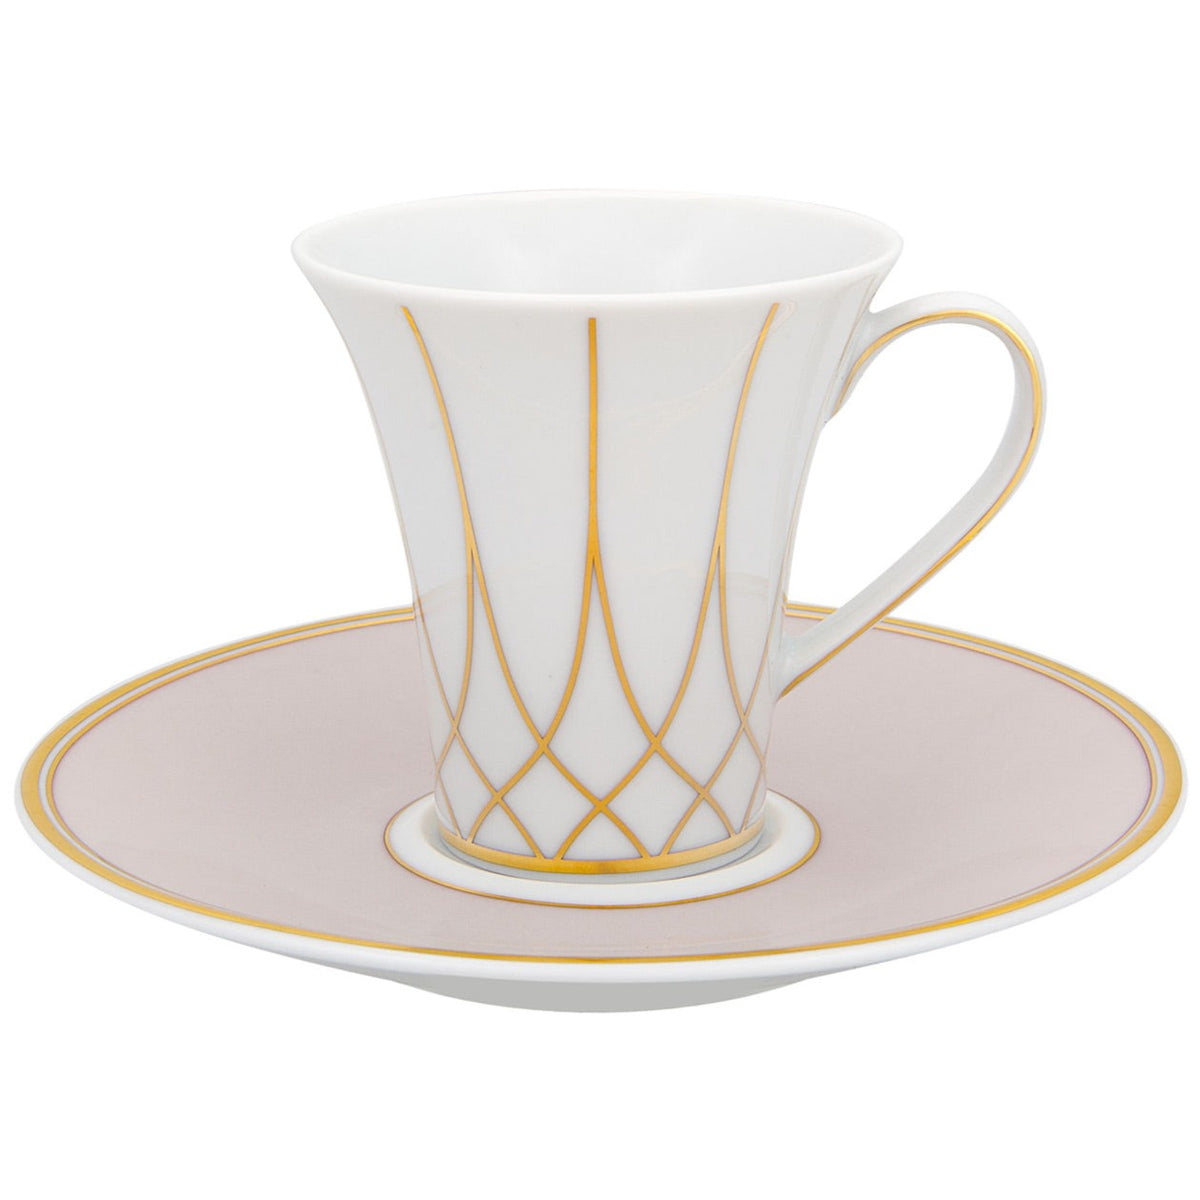 Terrace - Coffee Cup and Saucer 9CL - LAZADO